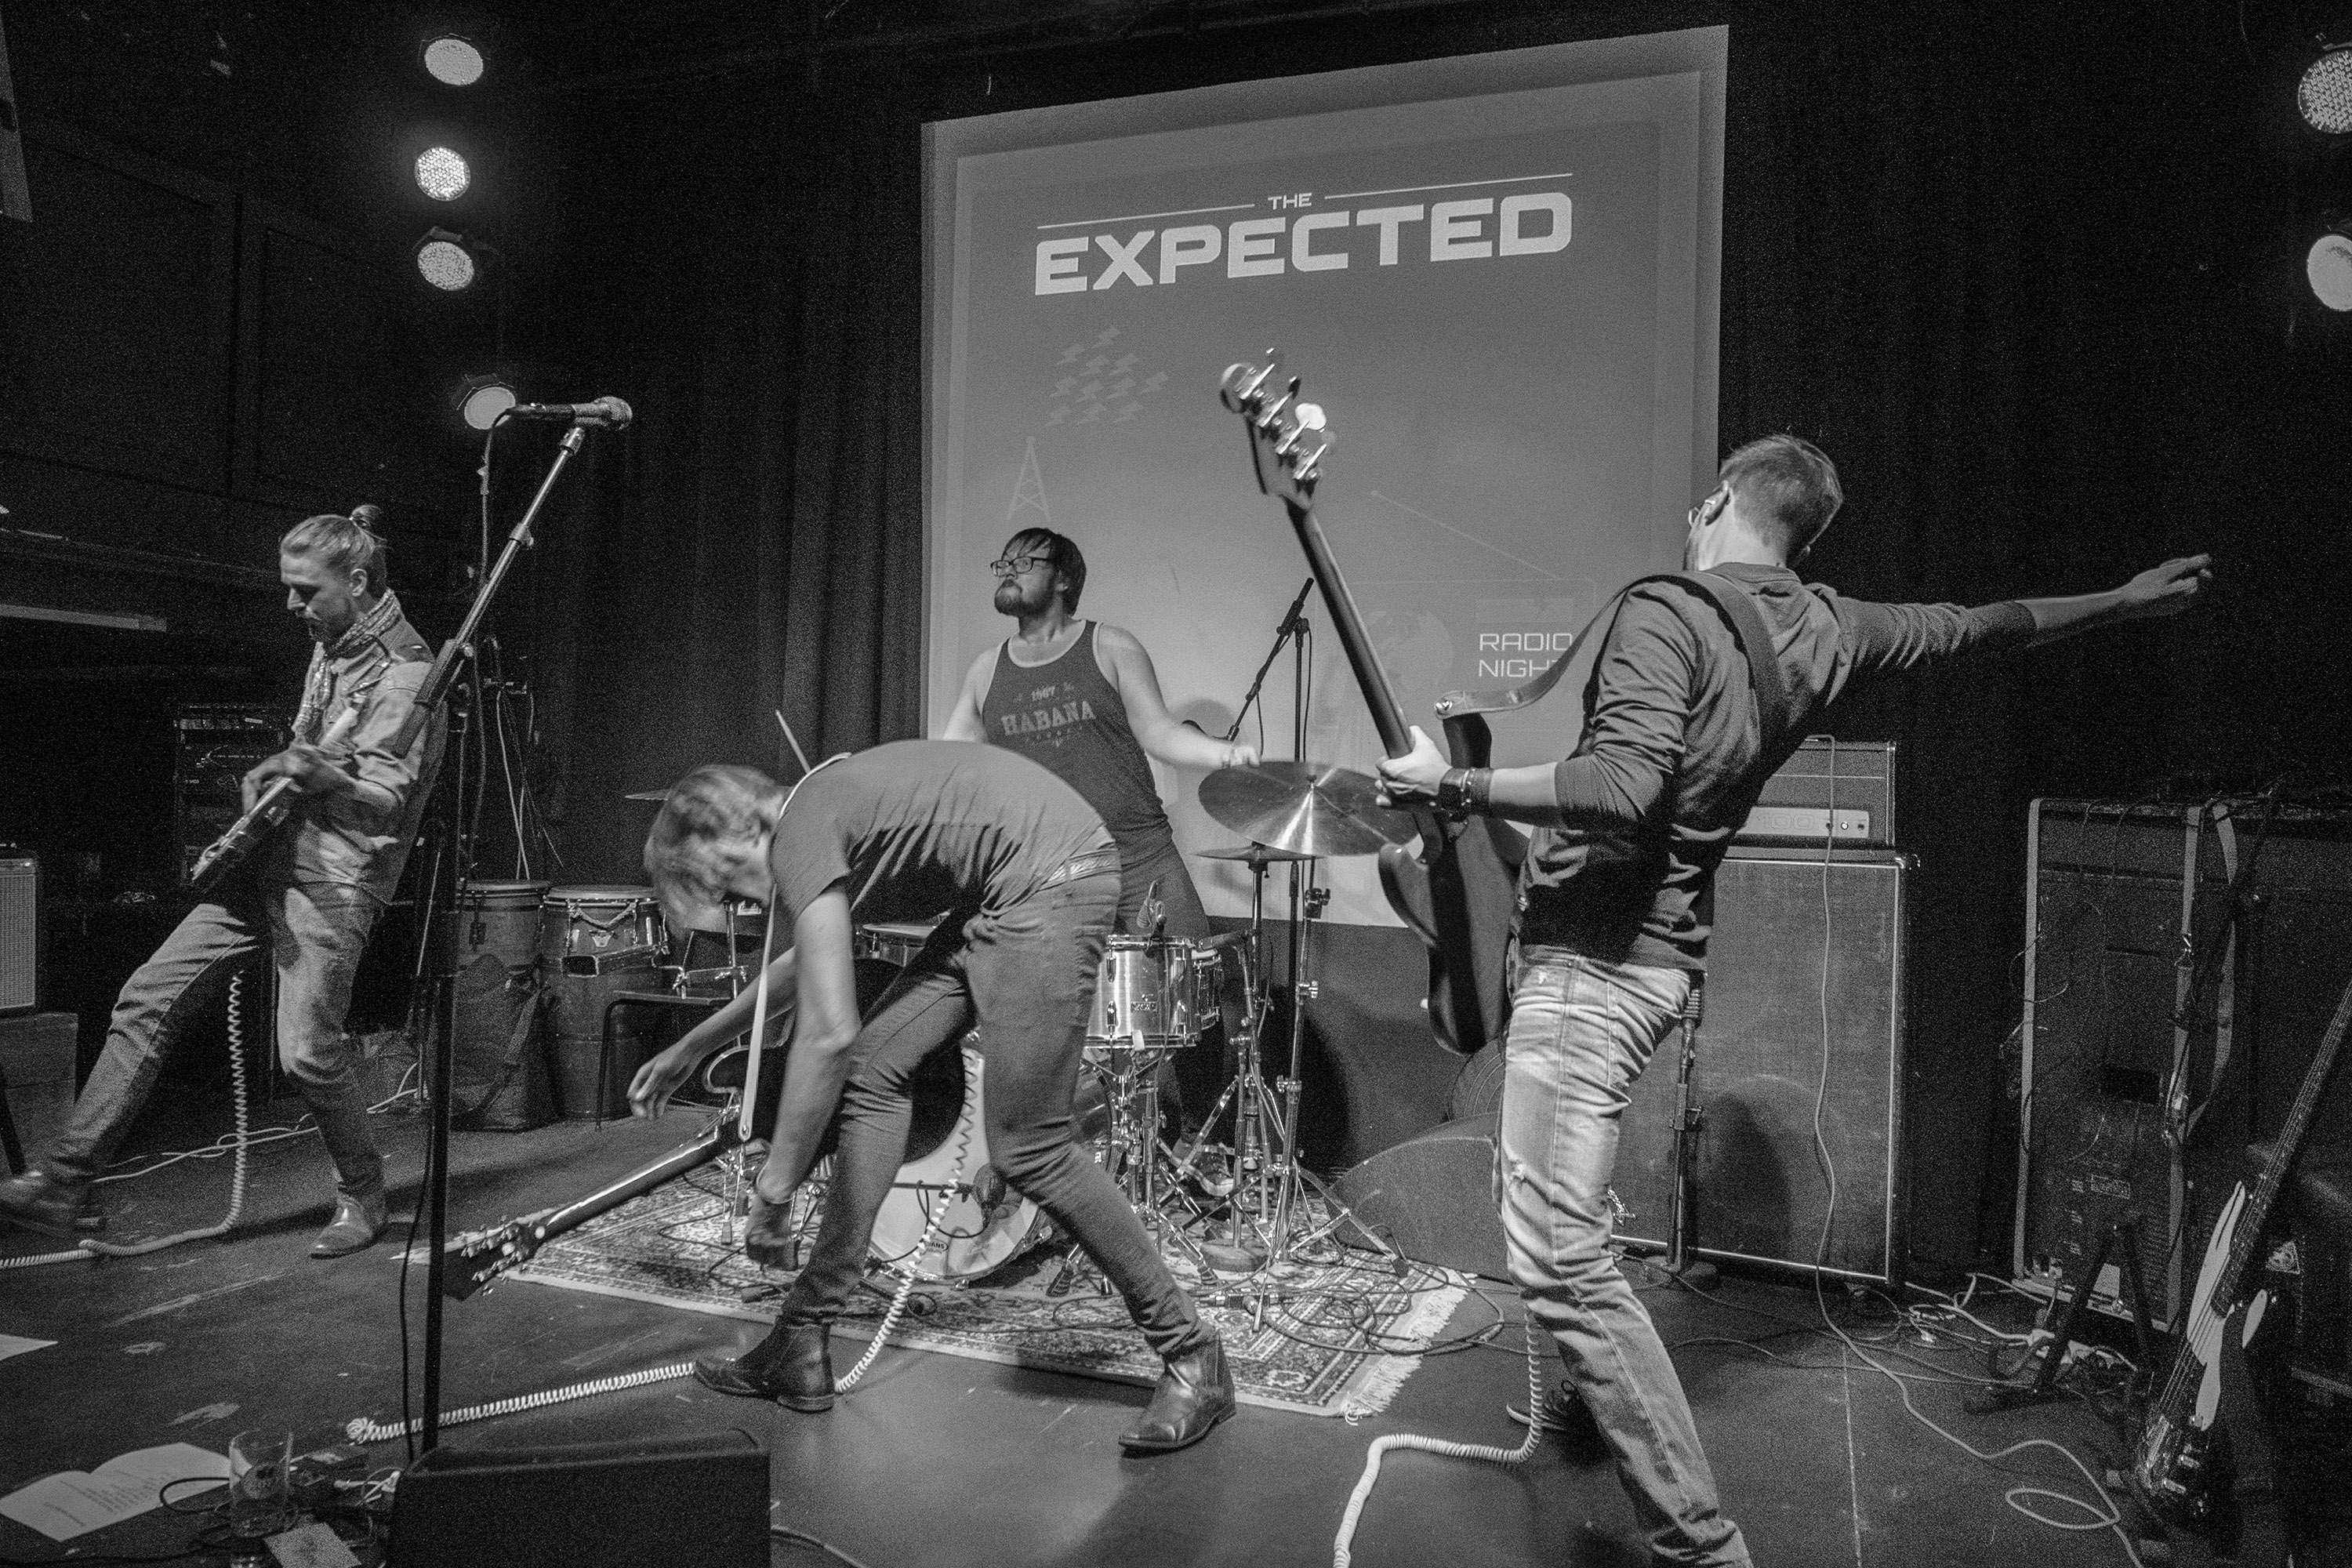 The Expected Live B&W